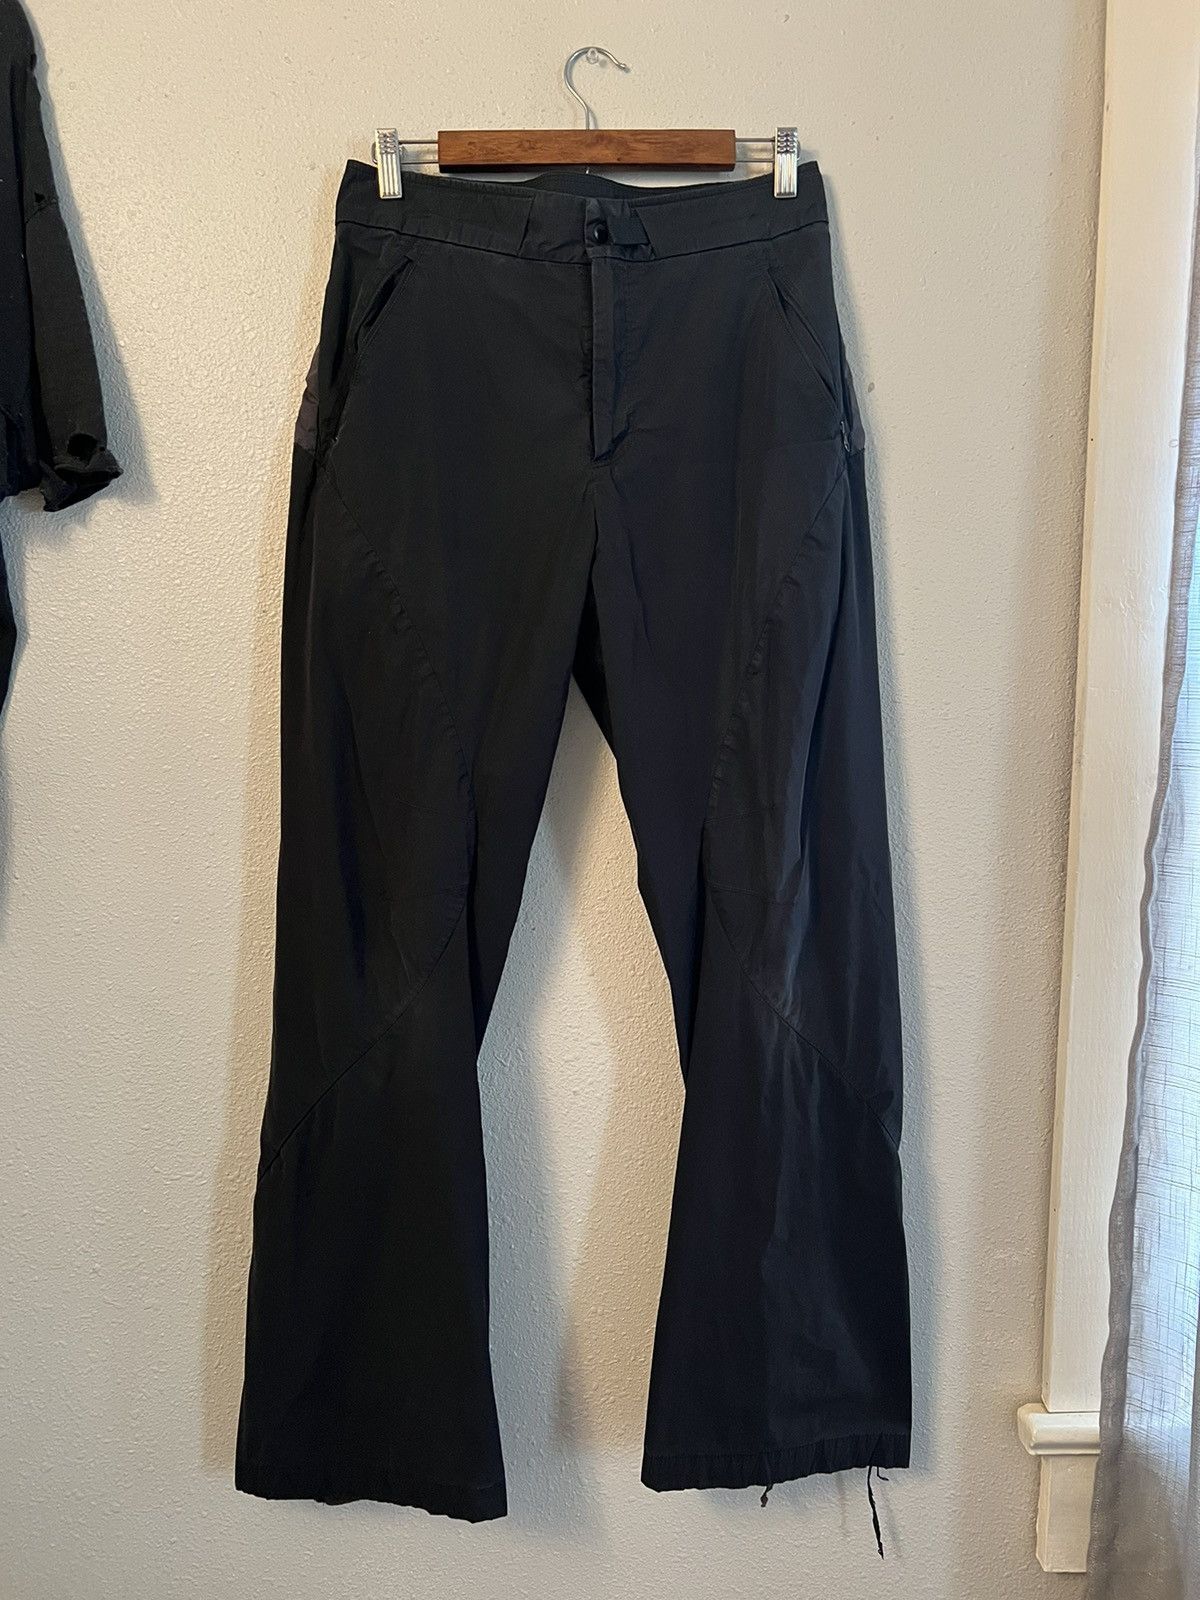 POST ARCHIVE FACTION (PAF) Post Archive Faction Right Trousers 30x30 |  Grailed